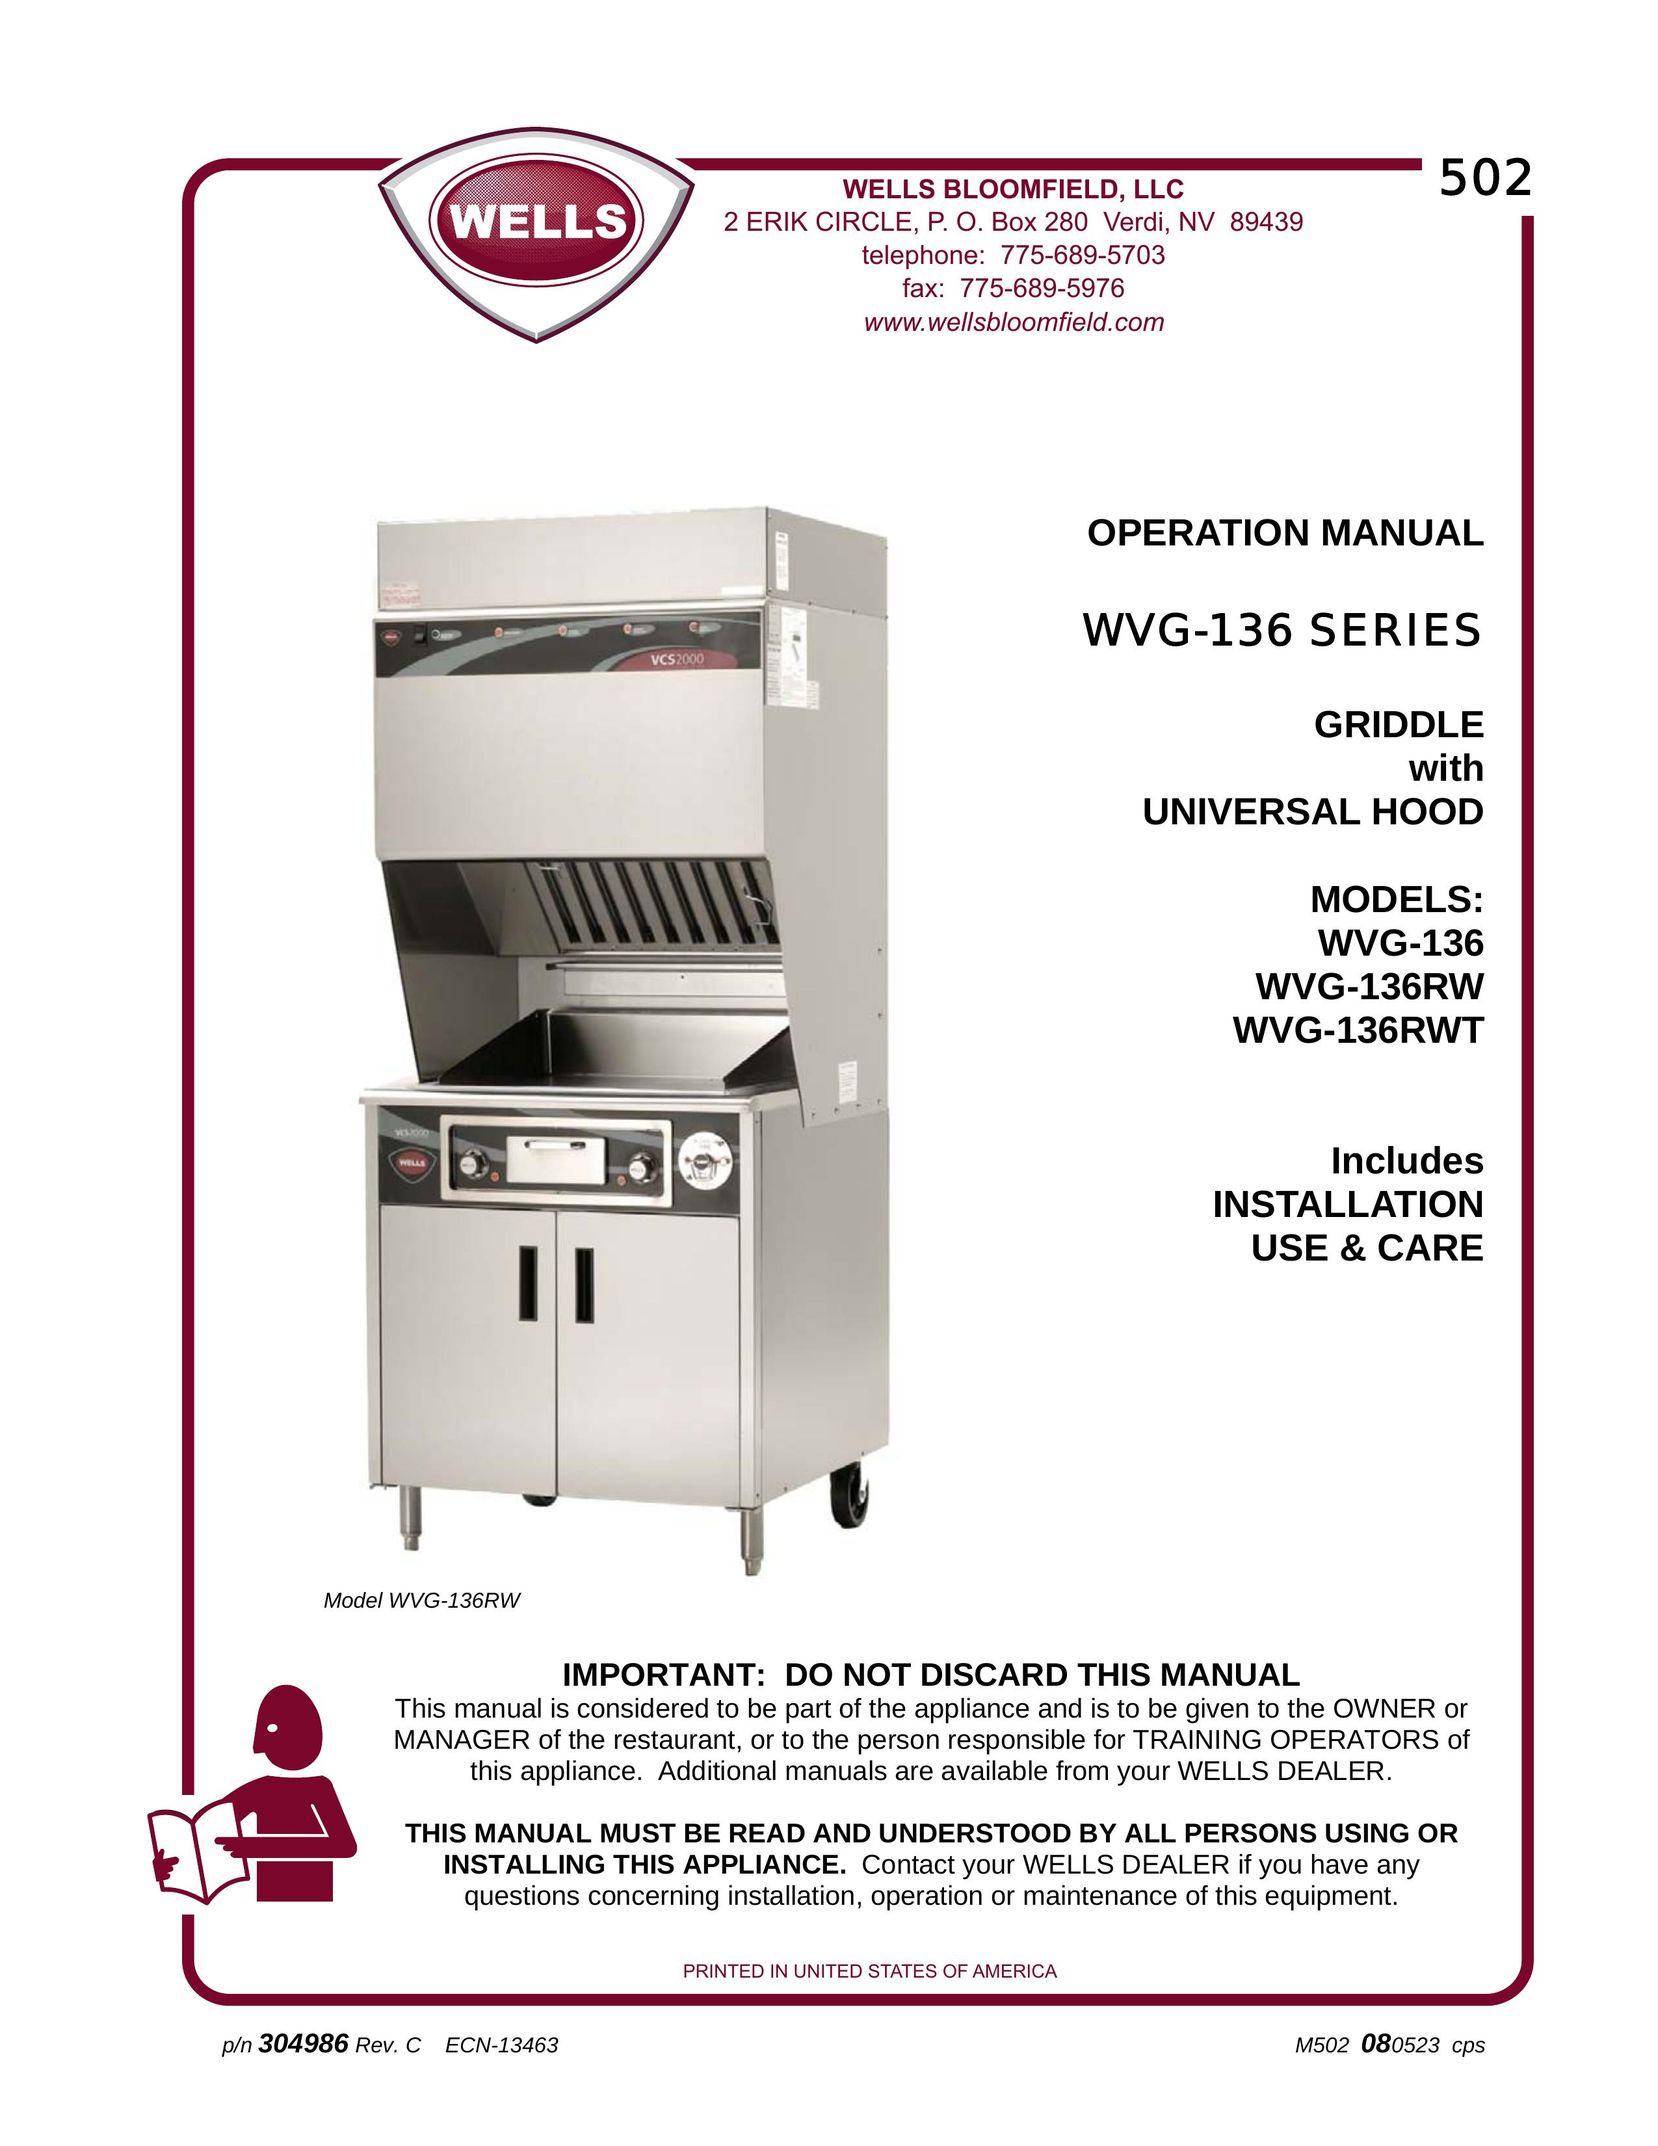 Bloomfield WVG-136 Griddle User Manual